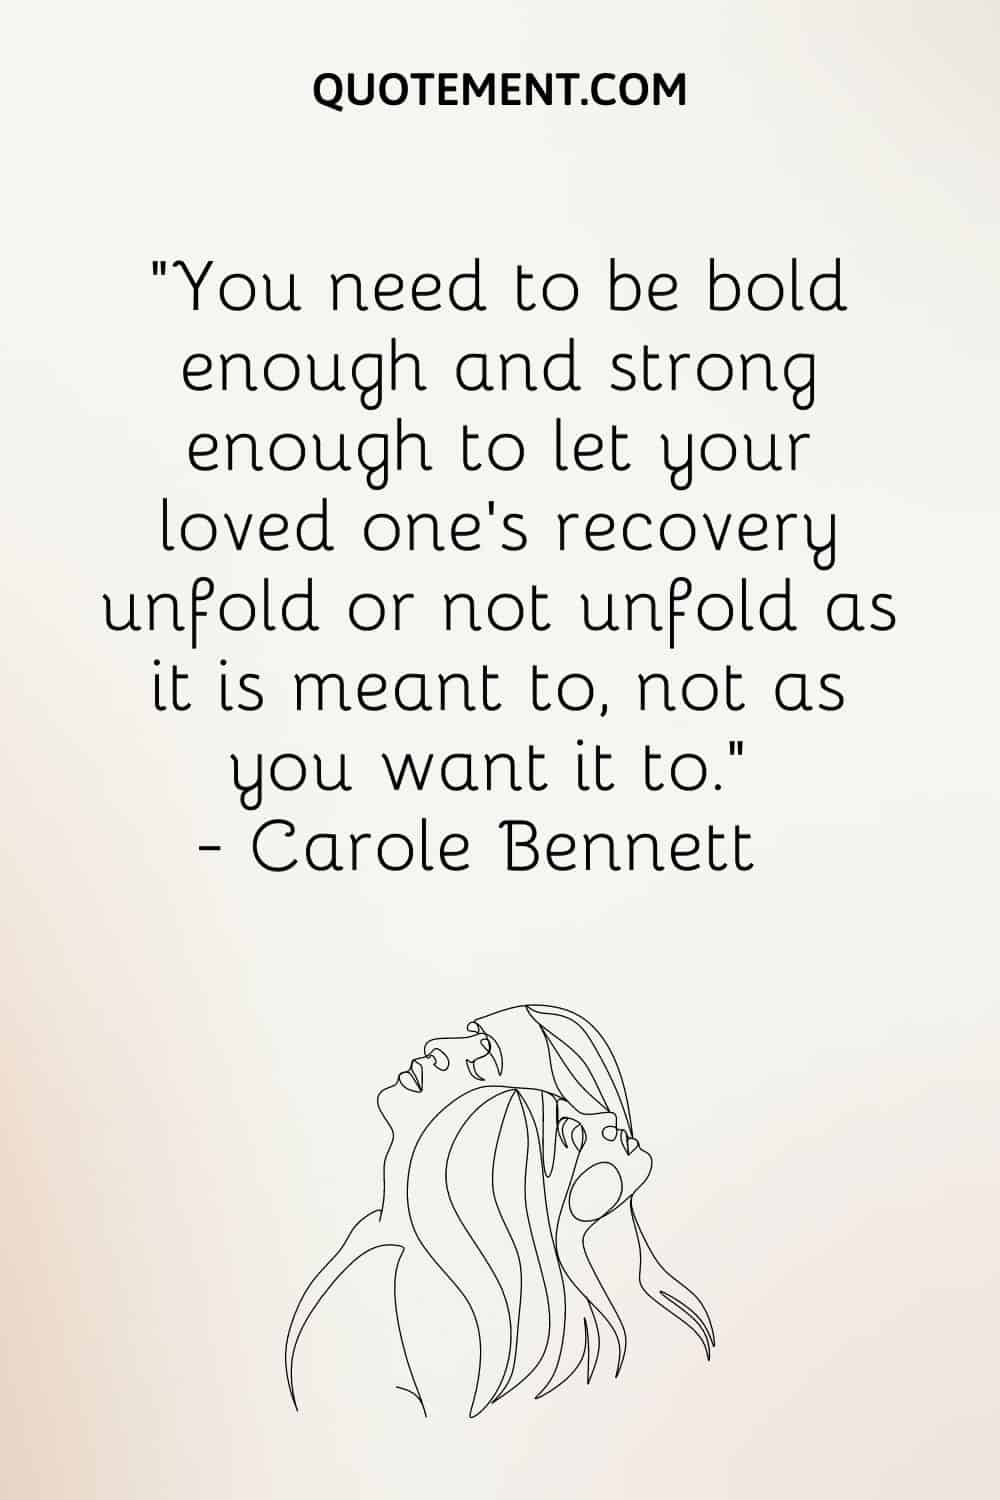 You need to be bold enough and strong enough to let your loved one’s recovery unfold or not unfold as it is meant to, not as you want it to